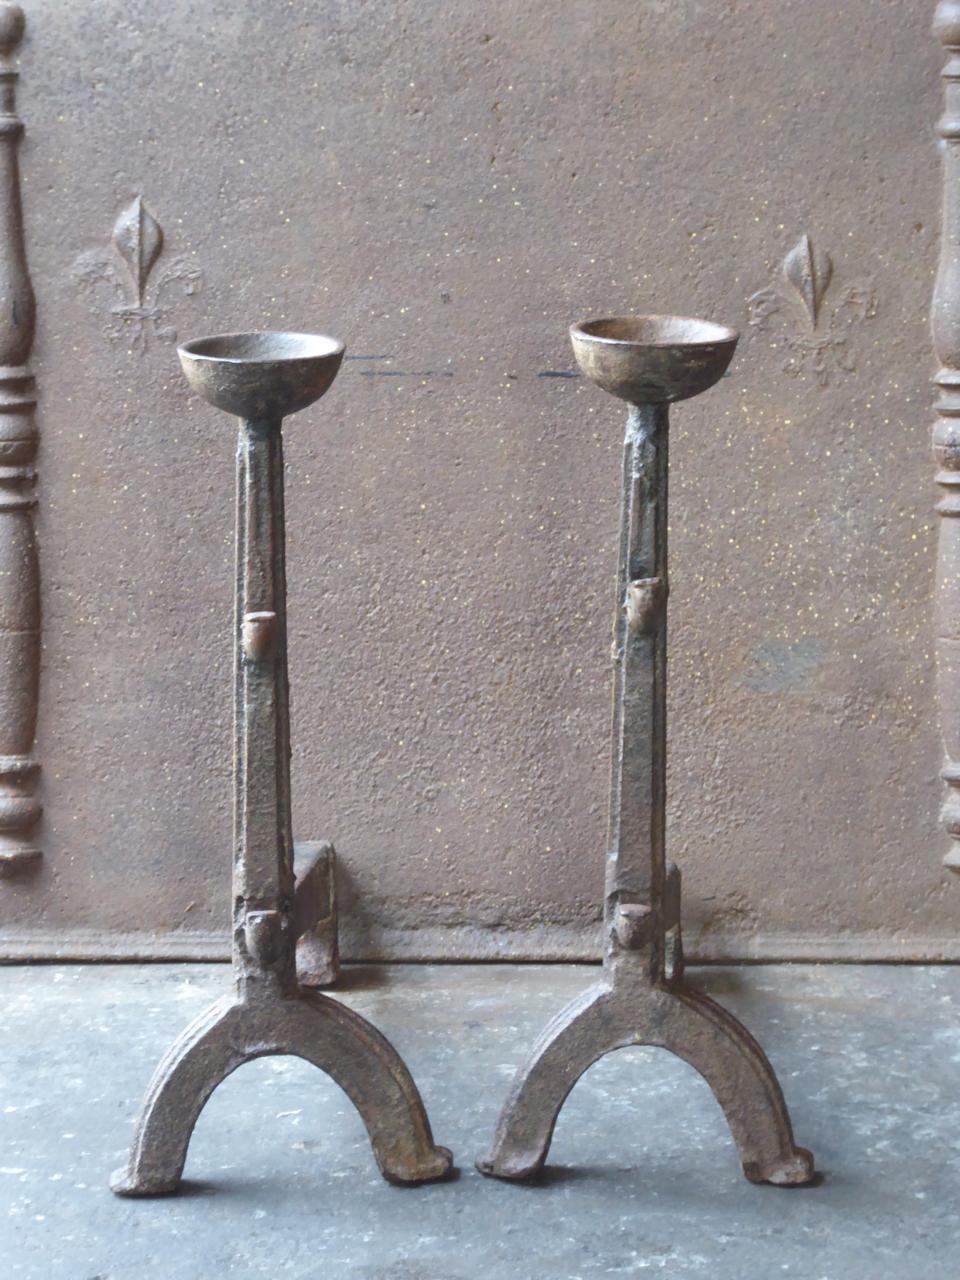 Impressive 16th-17th century French Gothic andirons made of cast iron. The andirons have spit hooks to grill food and cups to keep drinks warm. The andirons are therefore also called cup dogs.







 